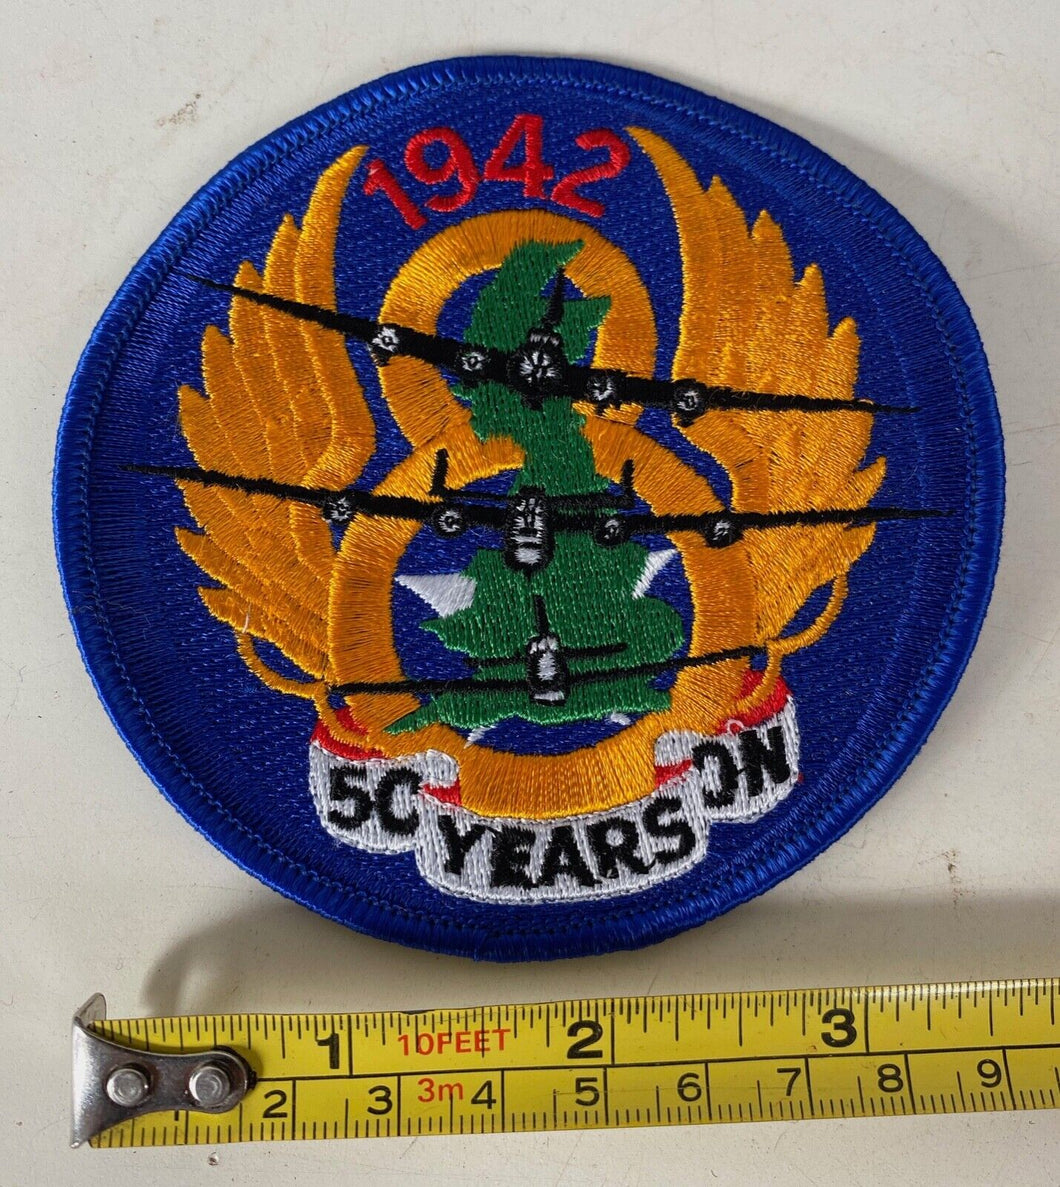 US 8th Air Force 50 year anniversary 1942 pilots jacket badge / patch. Unworn